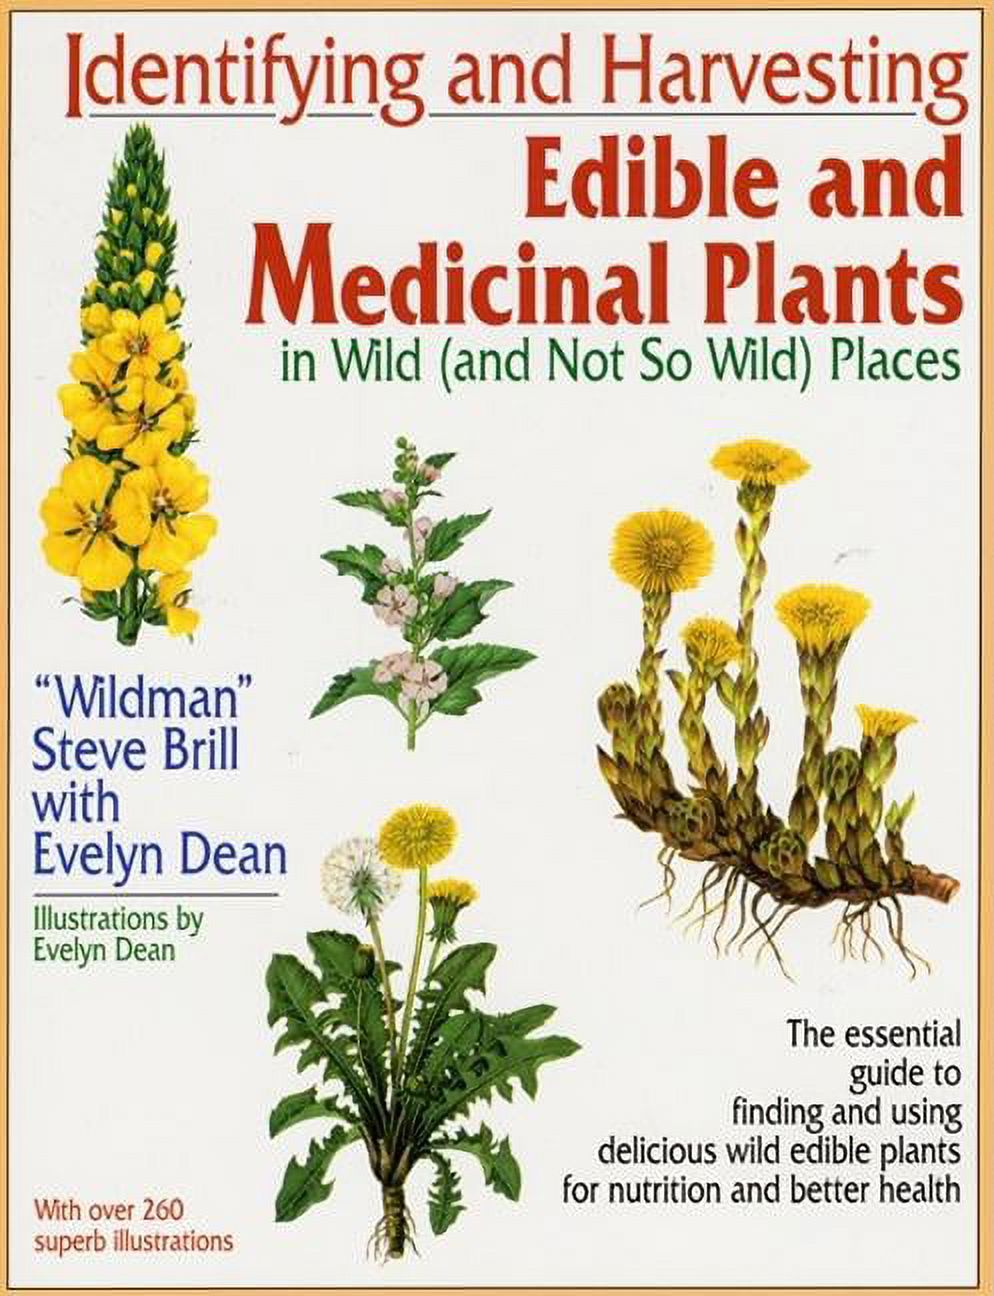 Identifying and Harvesting Edible and Medicinal Plants (Paperback) - image 1 of 1